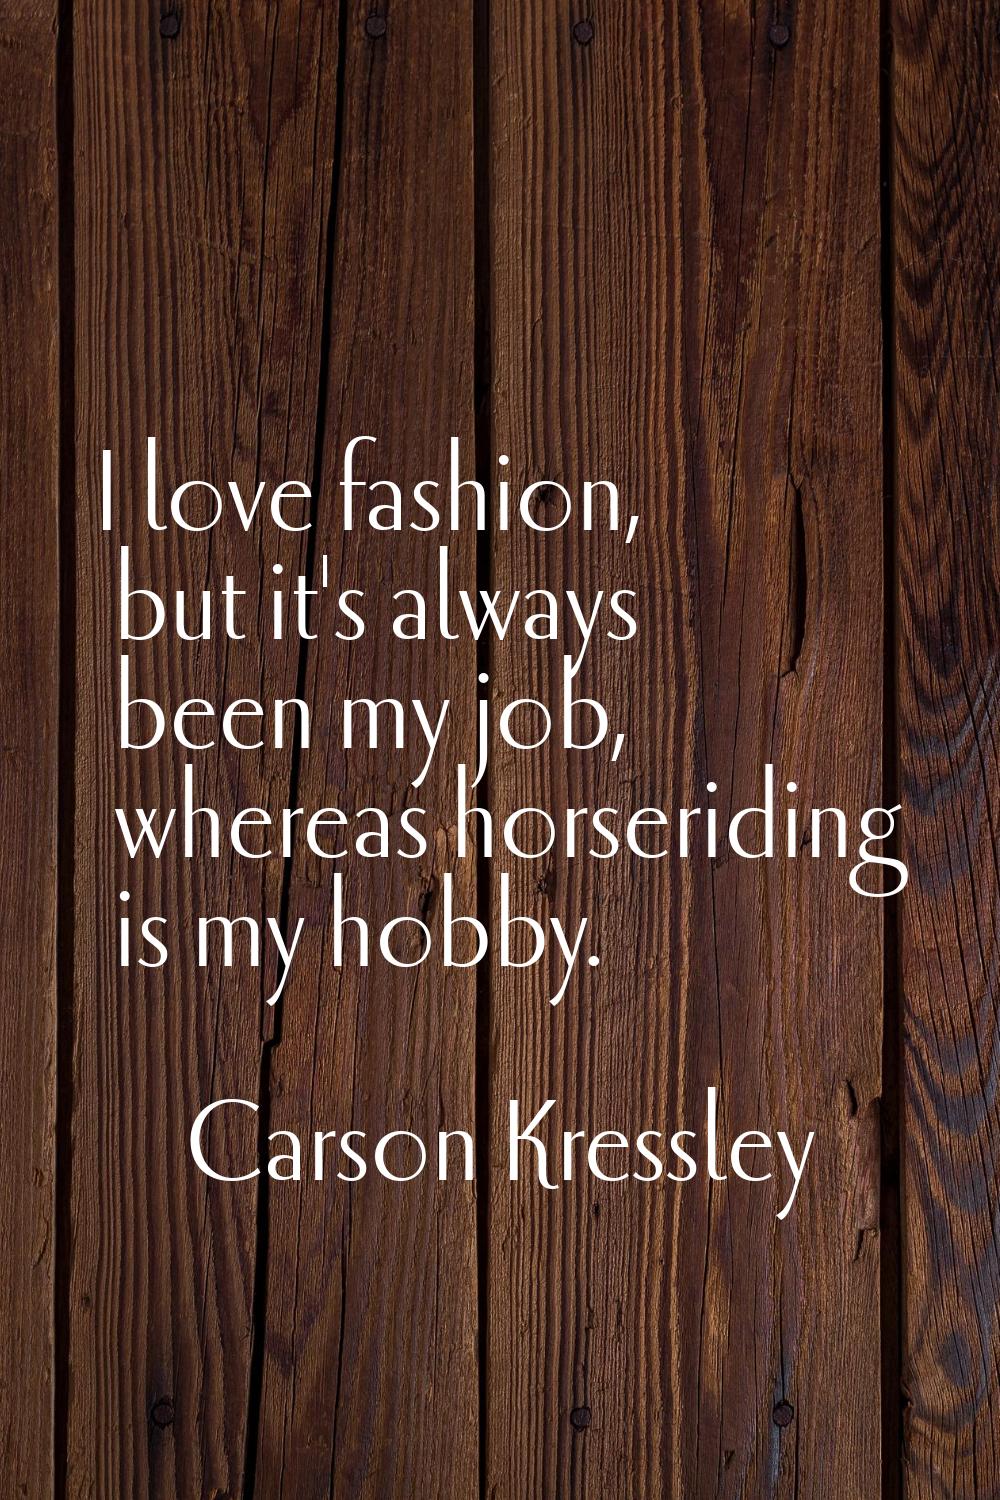 I love fashion, but it's always been my job, whereas horseriding is my hobby.